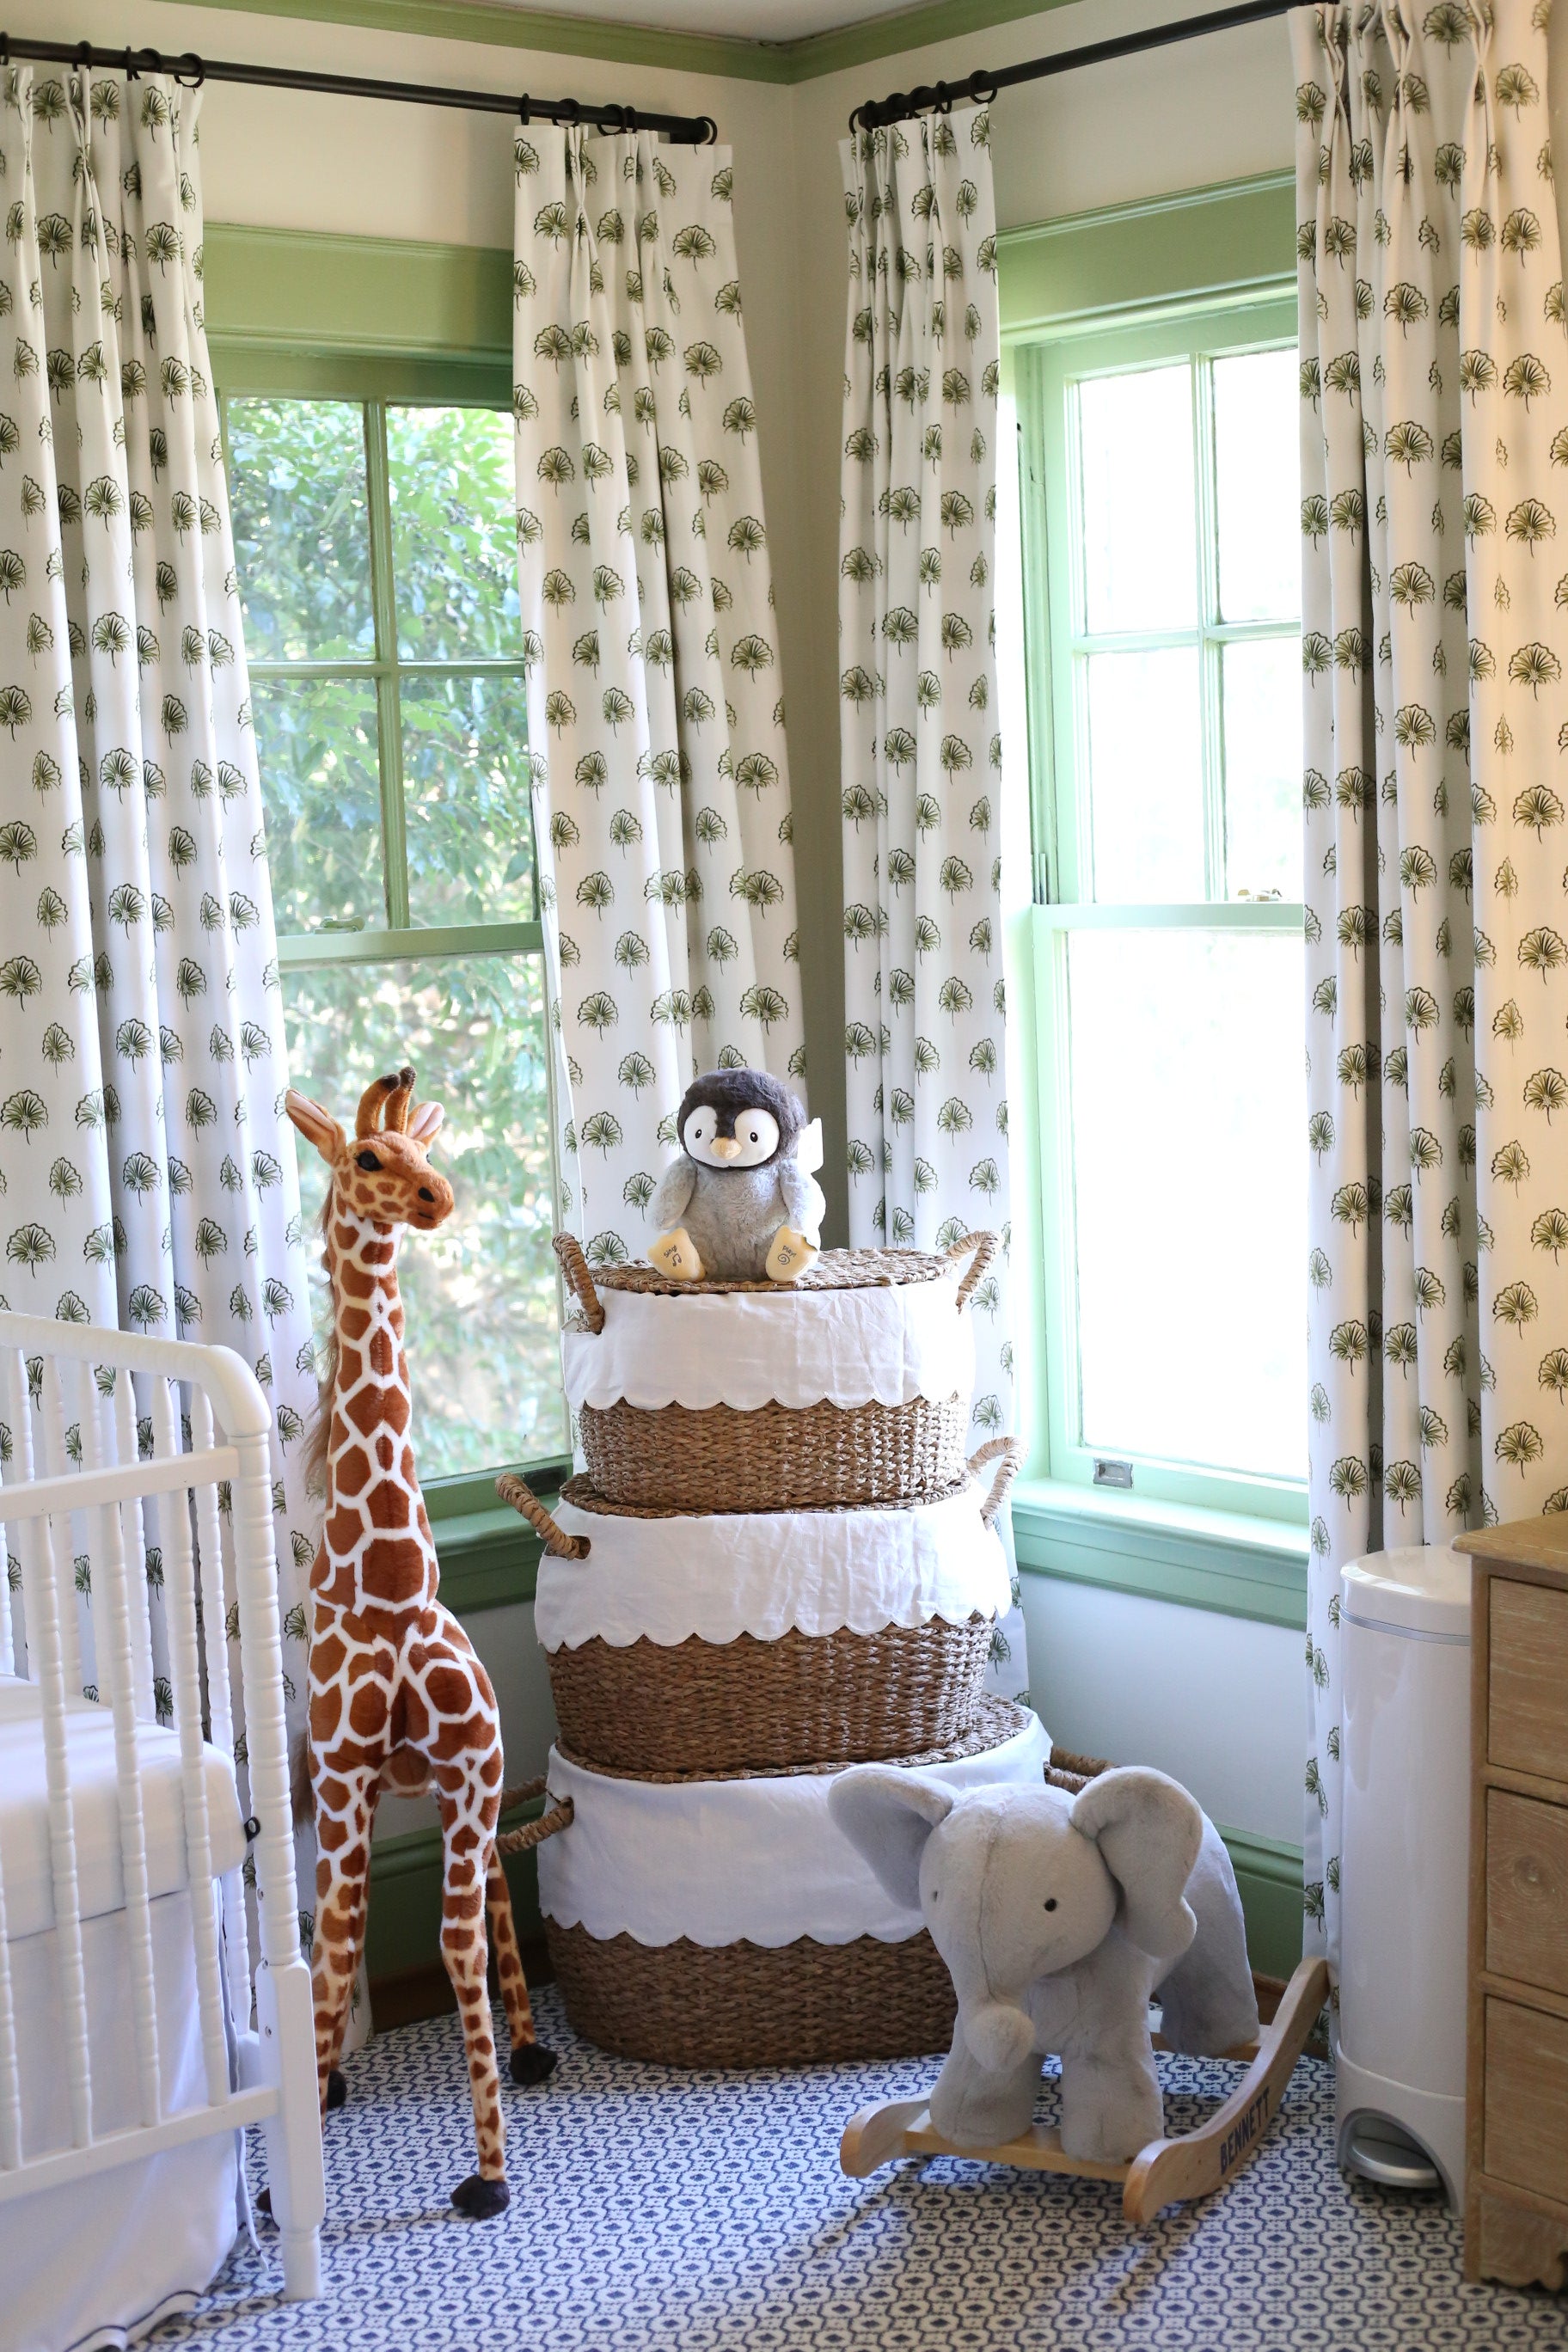 Corner of a green nursery with green floral curtains hanging on 2 windows behind stacked rattan baskets and a stuffed animal giraffe